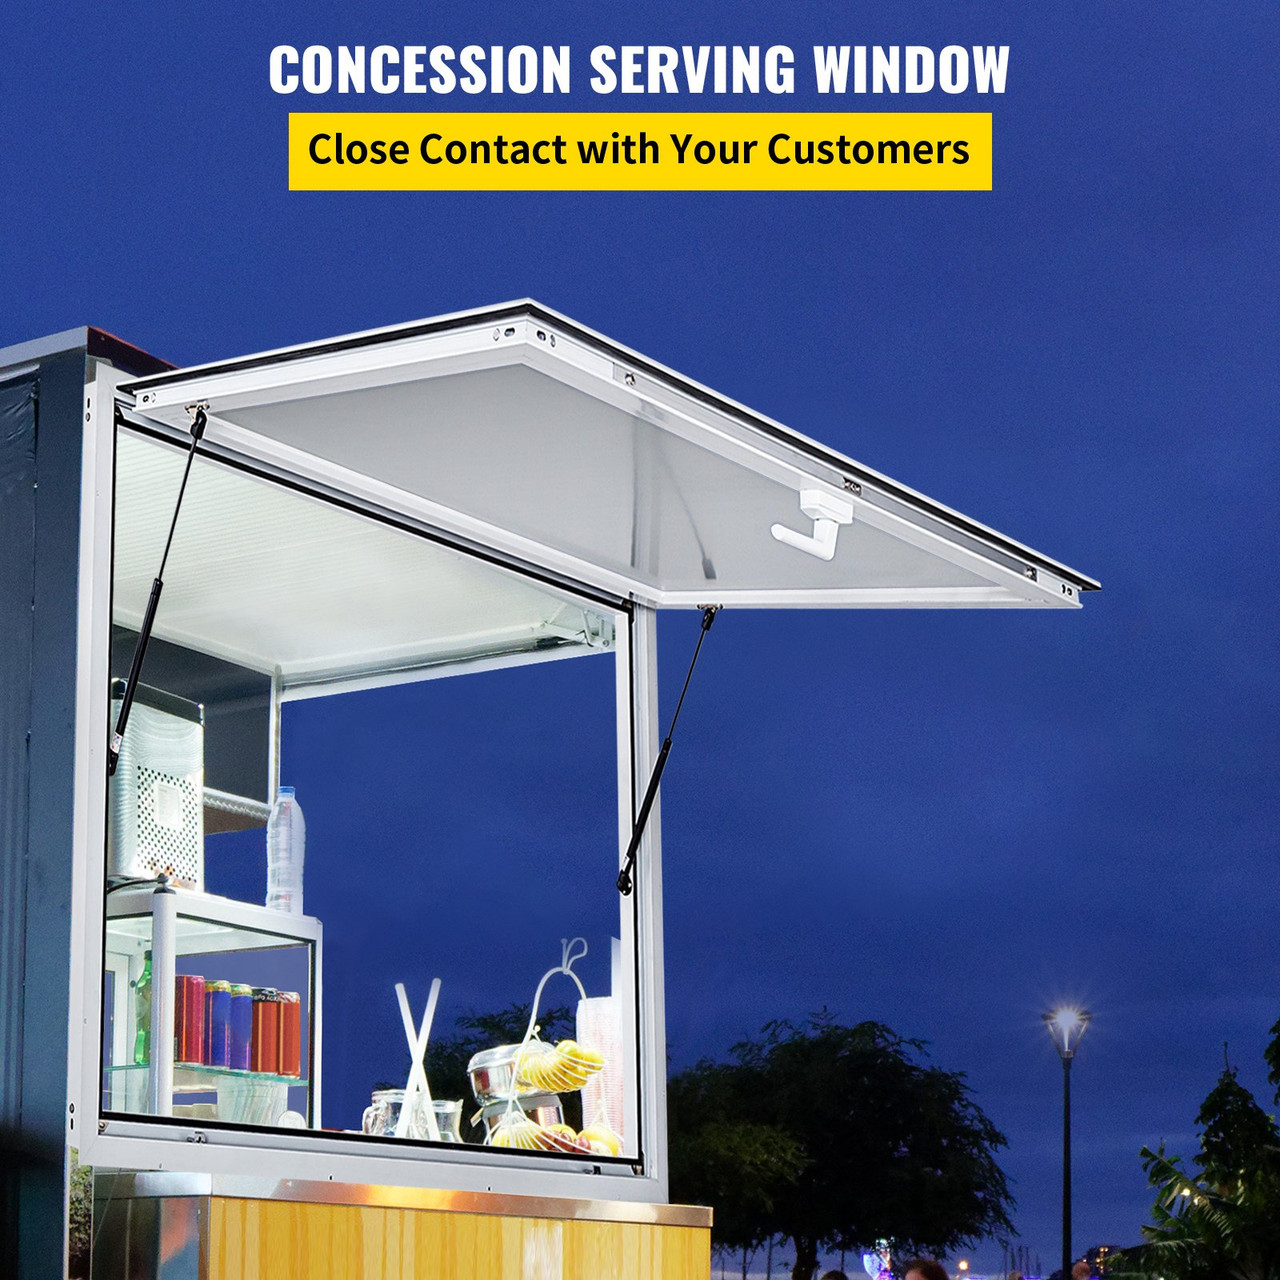 Concession Window 74 x 40 Inch, Concession Stand Serving Window Door with Double-Point Fork Lock, Concession Awning Door Up to 85 degrees for Food